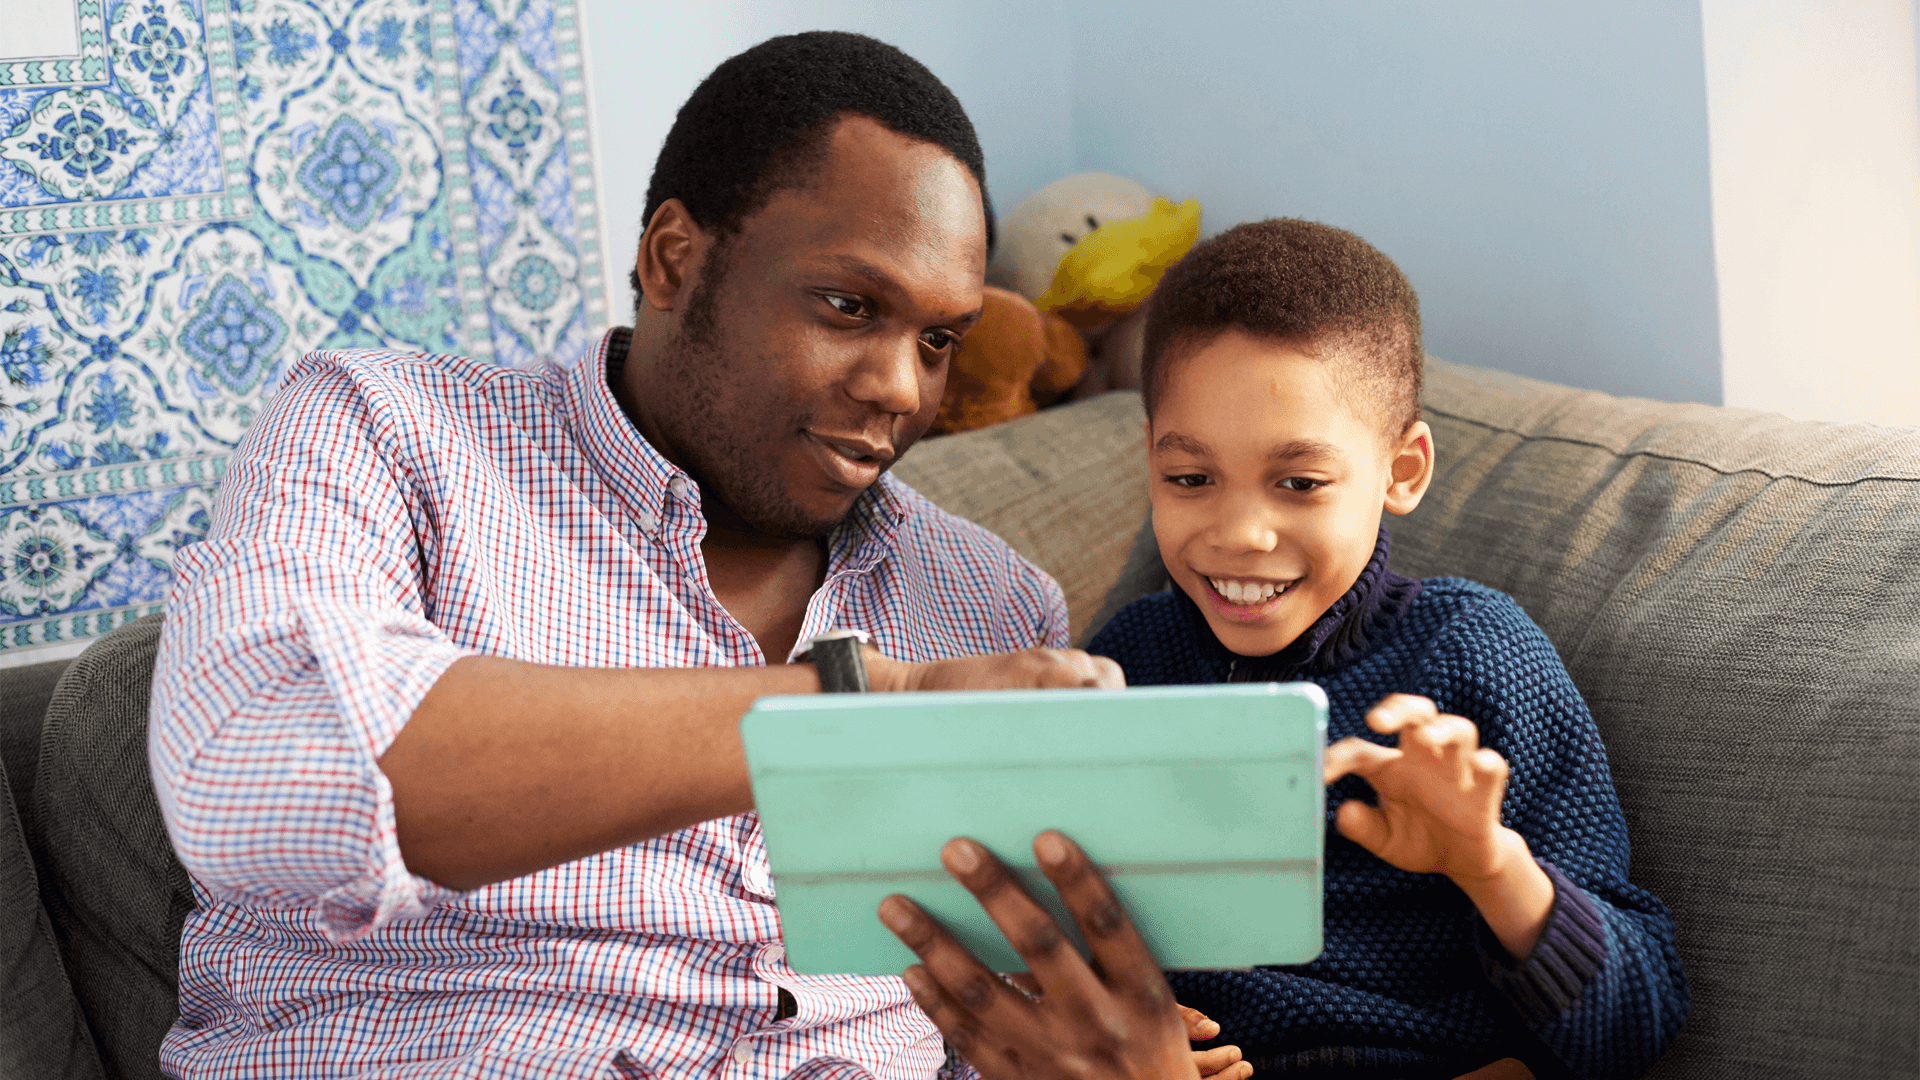 A father and son using a tablet together on the sofa smiling